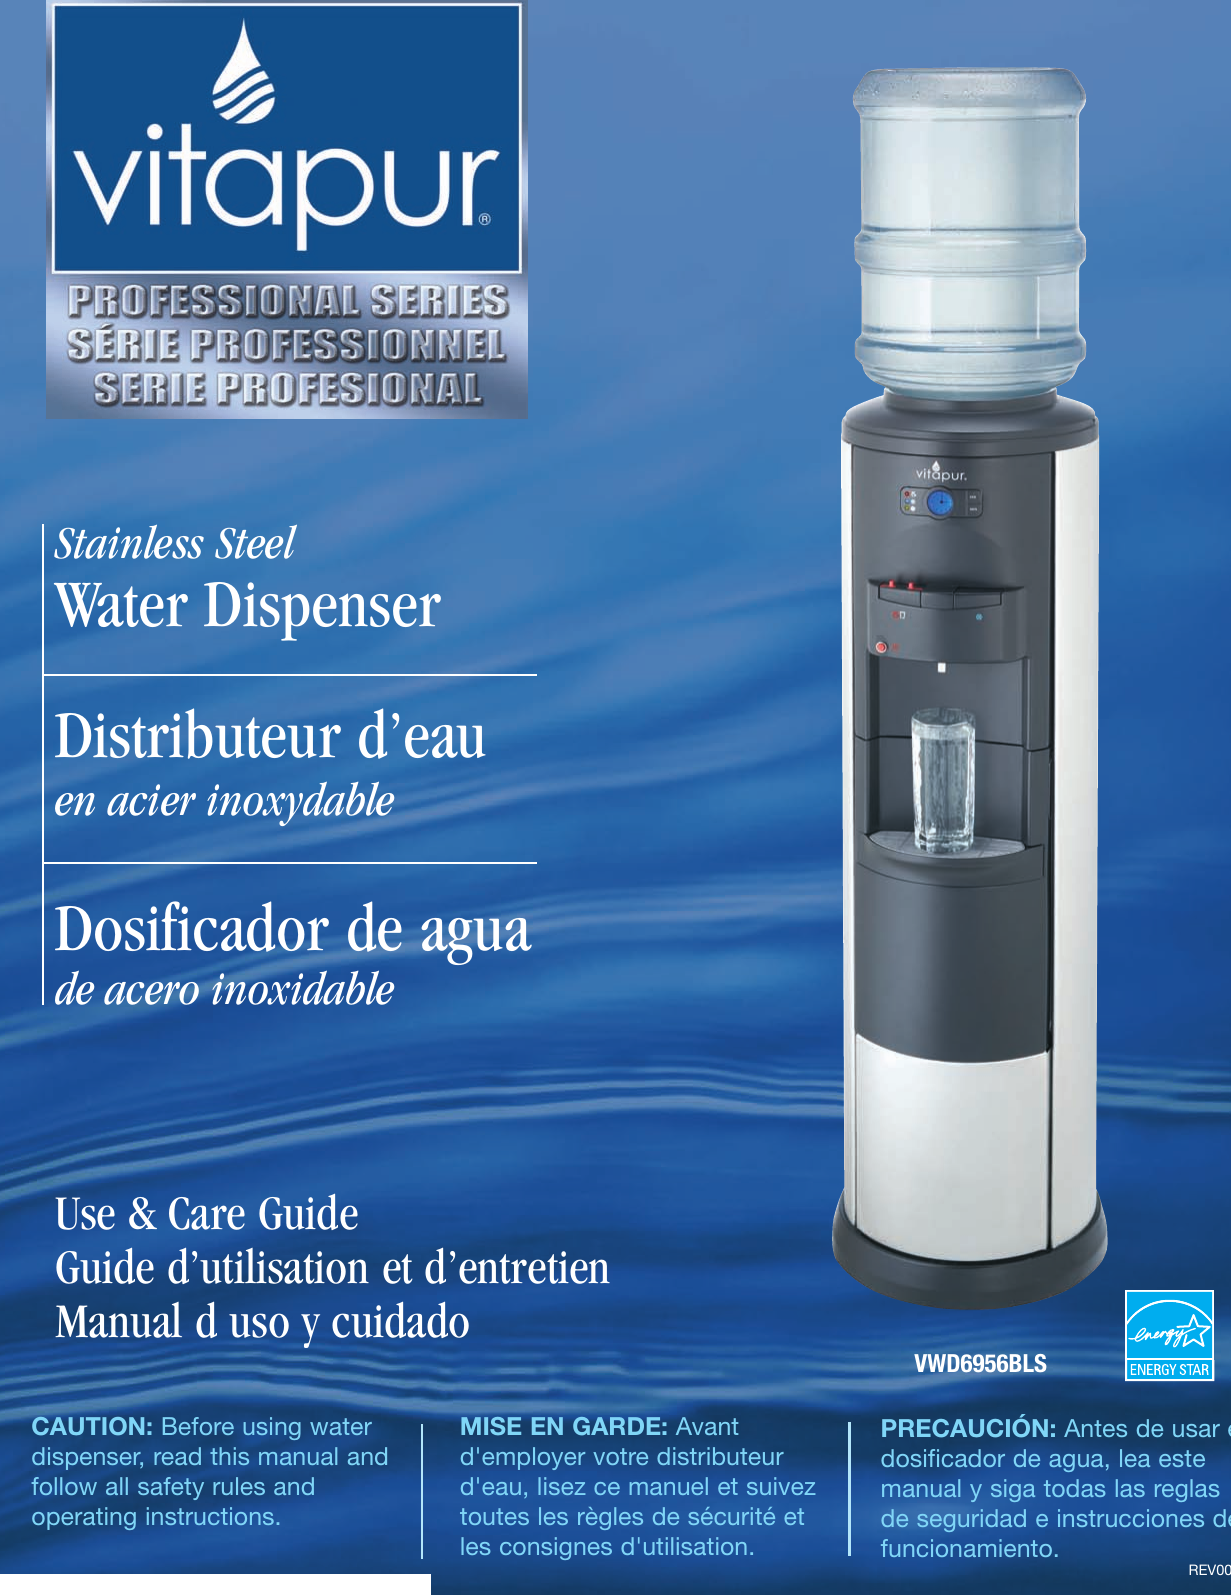 Page 1 of 10 - Vitapur Vitapur-Water-Dispenser-Use-And-Care-Manual- ManualsLib - Makes It Easy To Find Manuals Online!  Vitapur-water-dispenser-use-and-care-manual